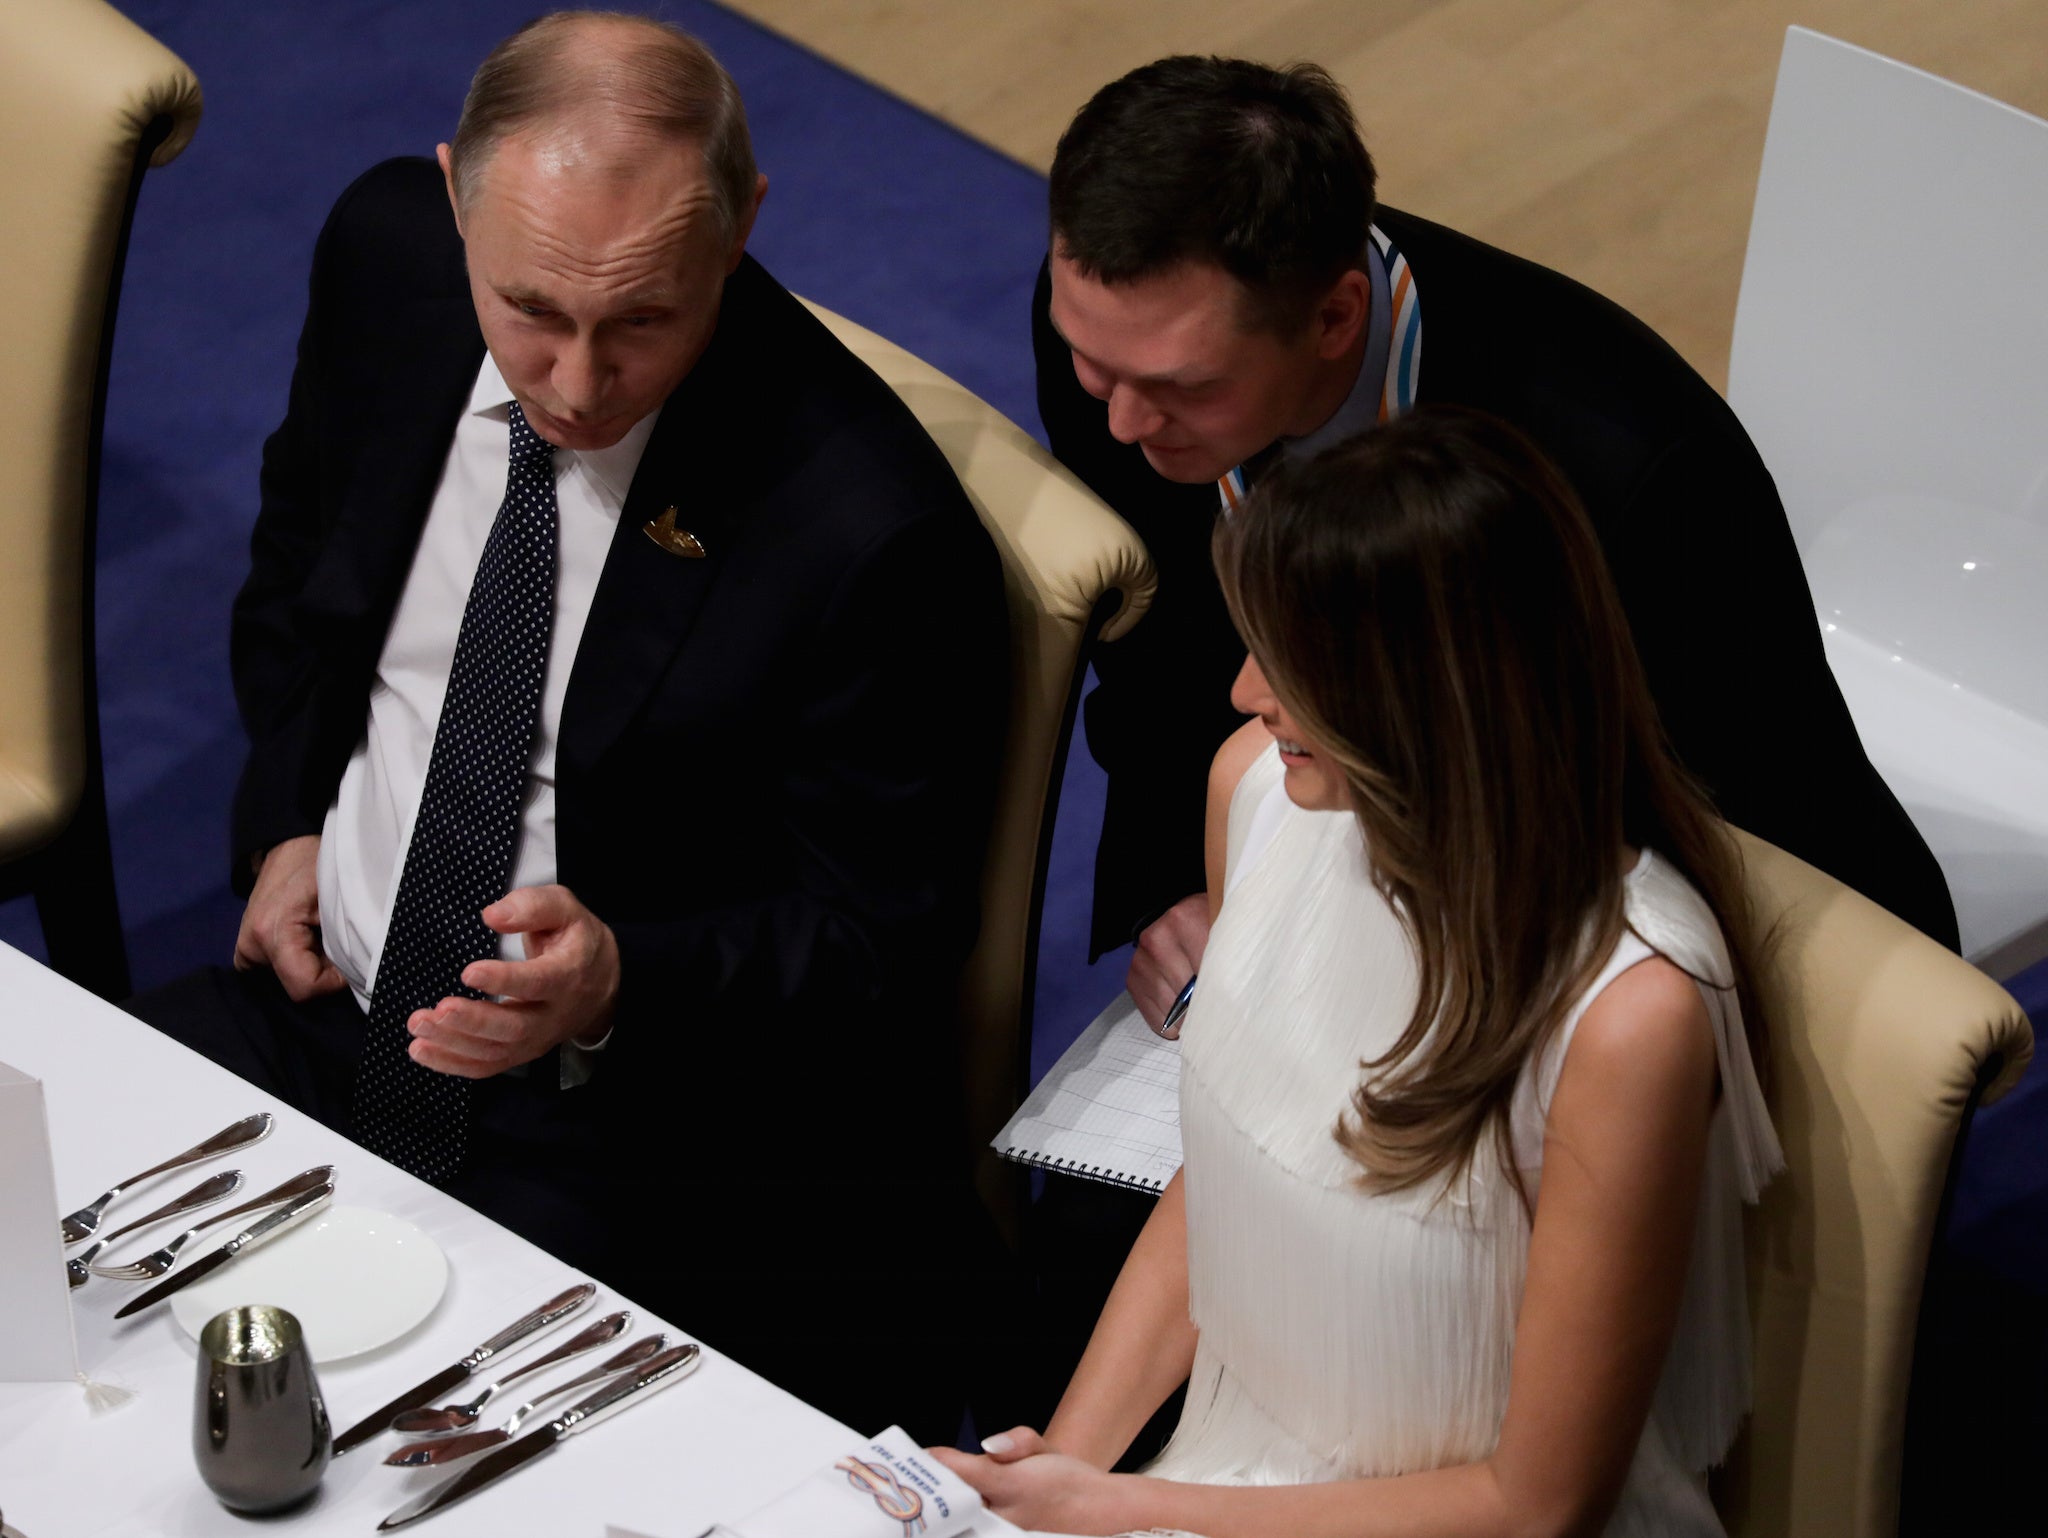 Russia's President Vladimir Putin laughs with Melania Trump during the official dinner at the Elbphilharmonie Concert Hall during the G20 summit in Hamburg